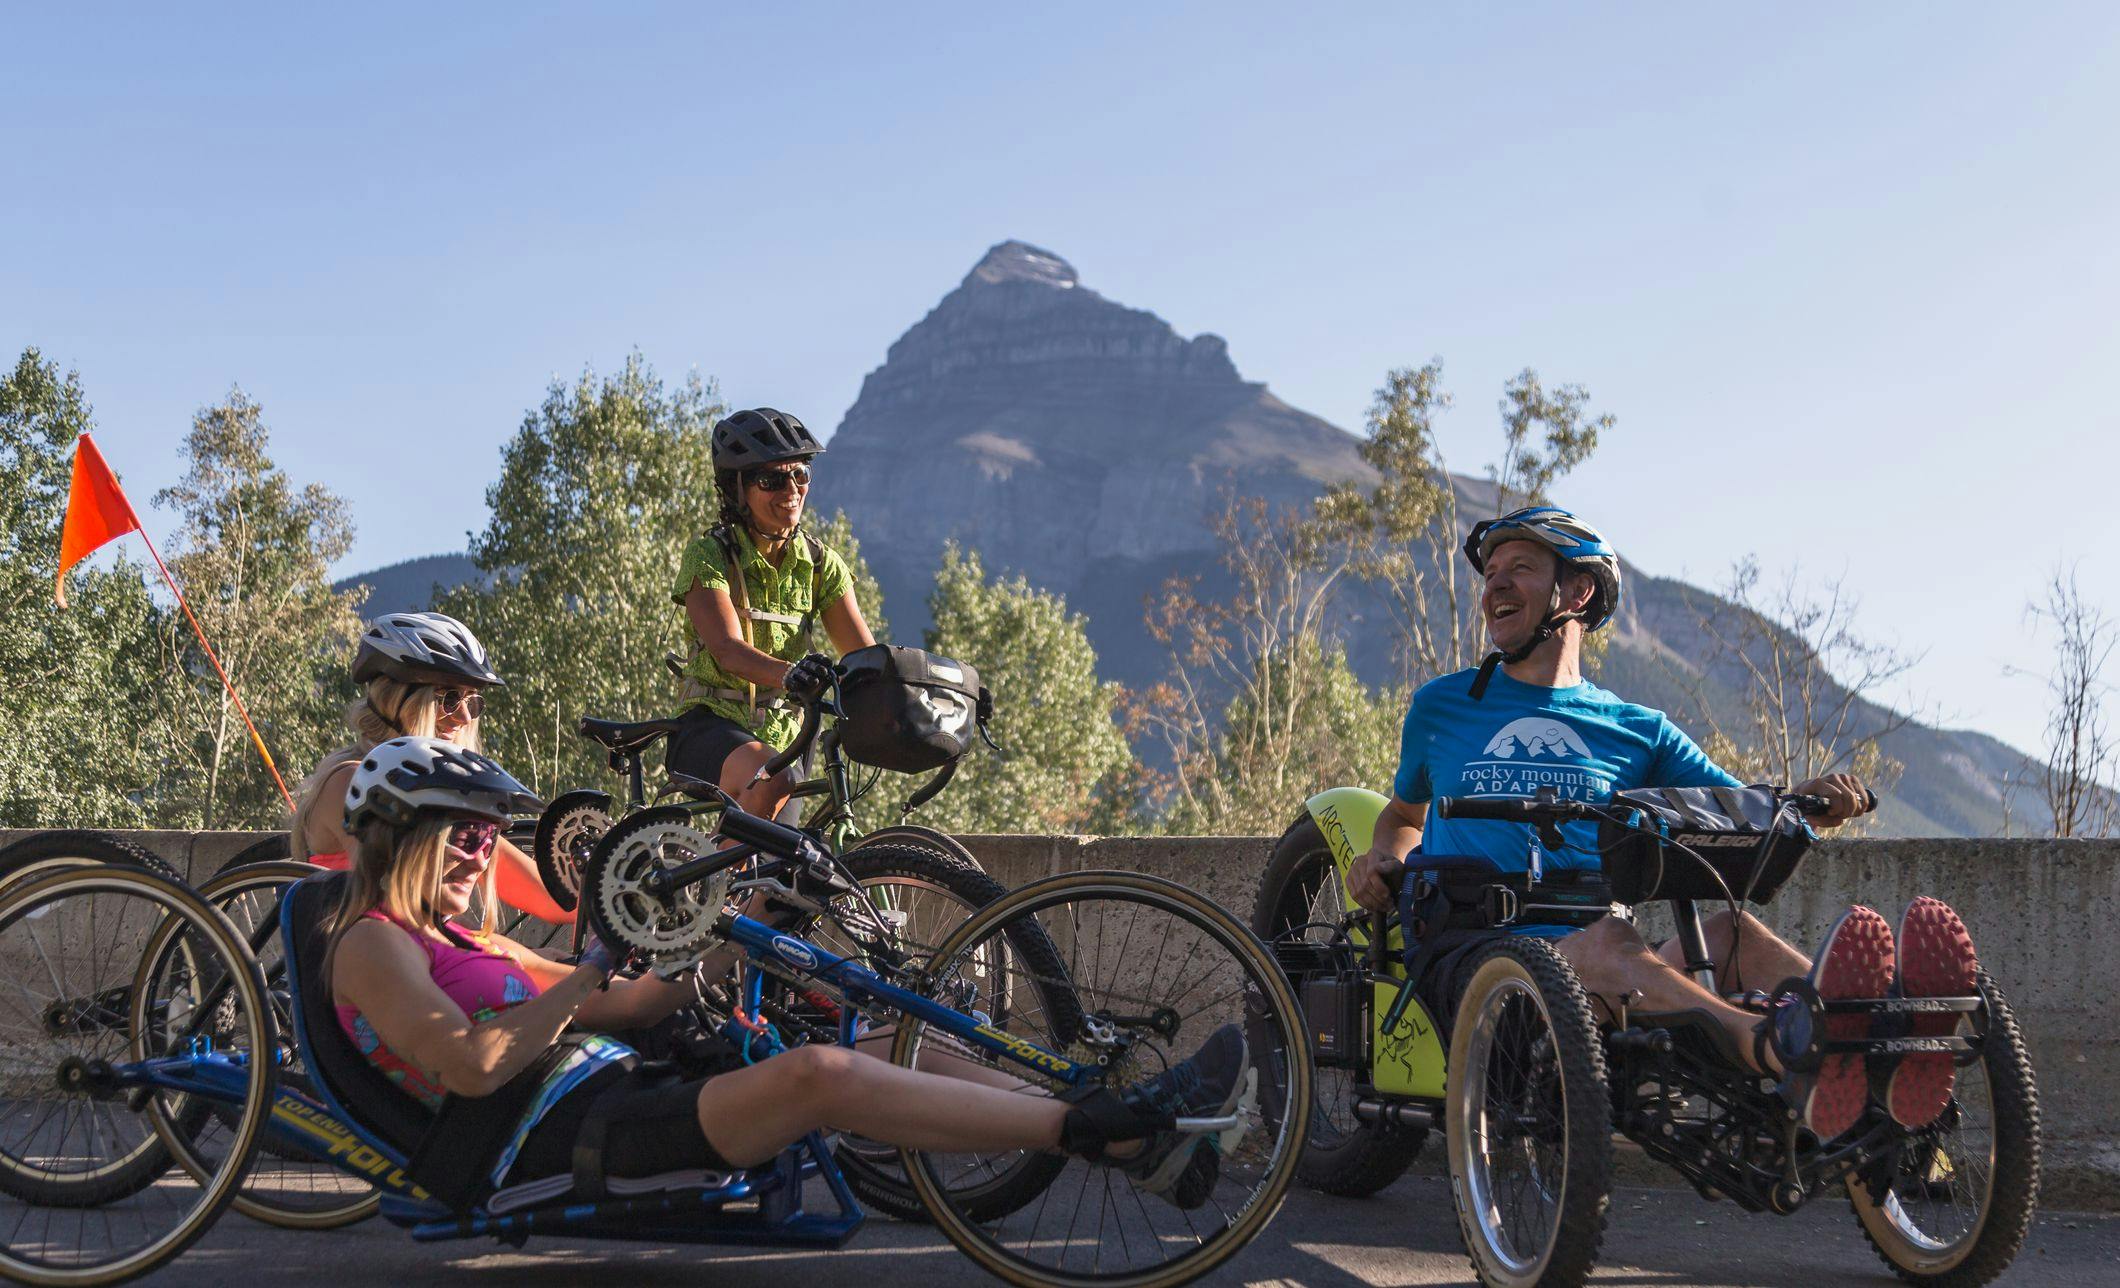 A group of bike riders stop at the Pilot Mountain viewpoint on the Bow Valley Parkway during the road closure.